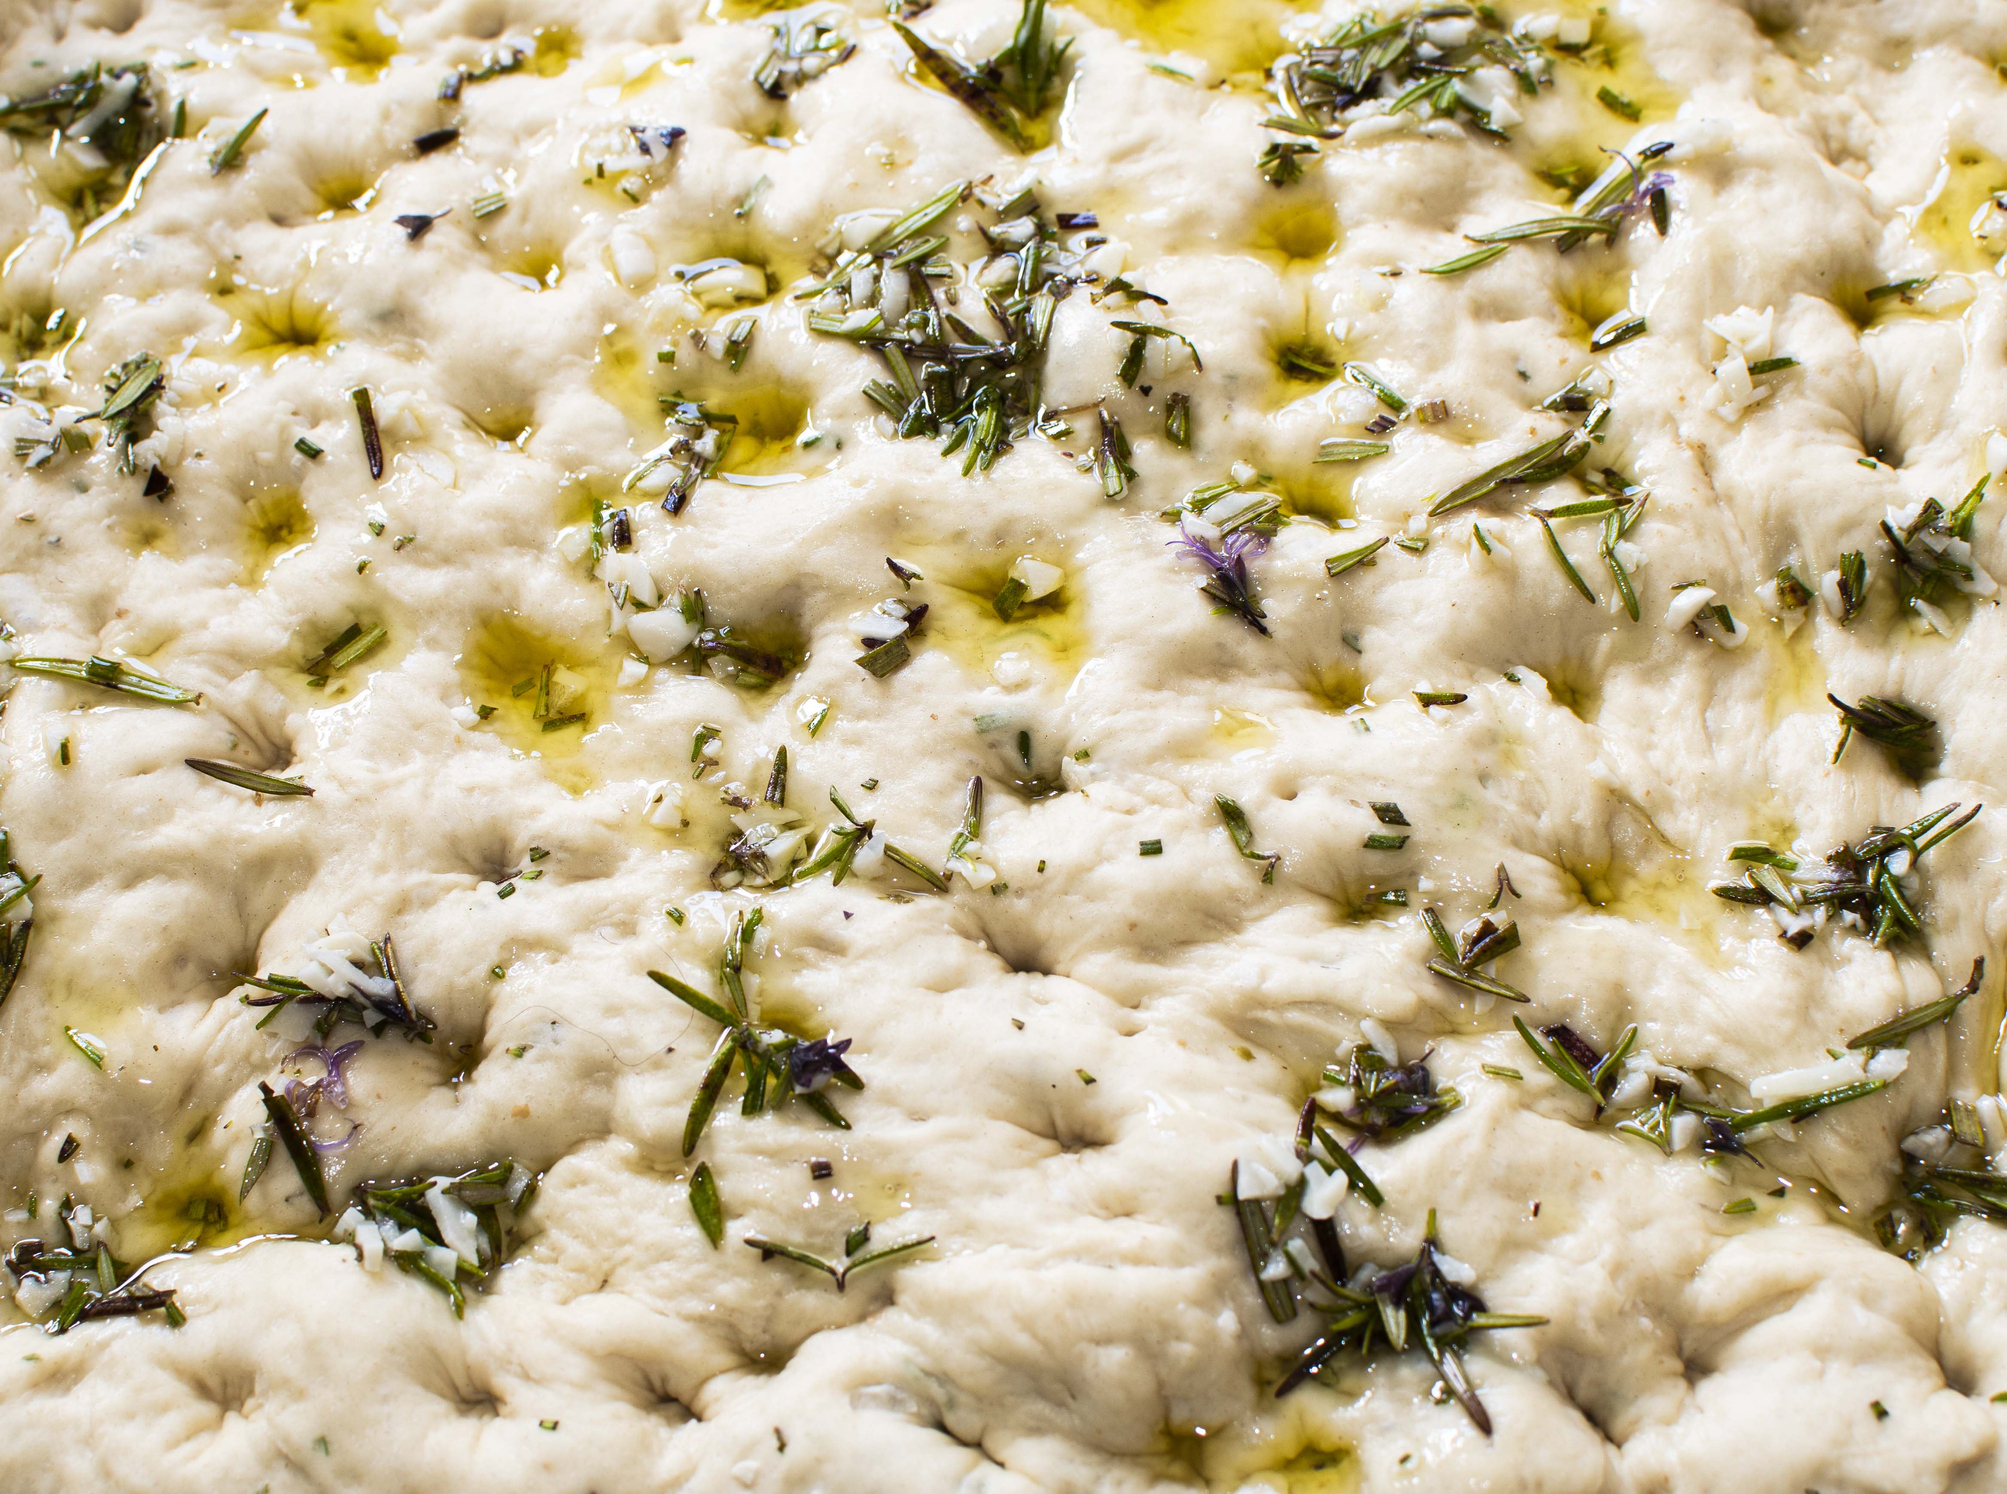 Close-up of freshly prepared focaccia bread dough topped with herbs and oil before baking